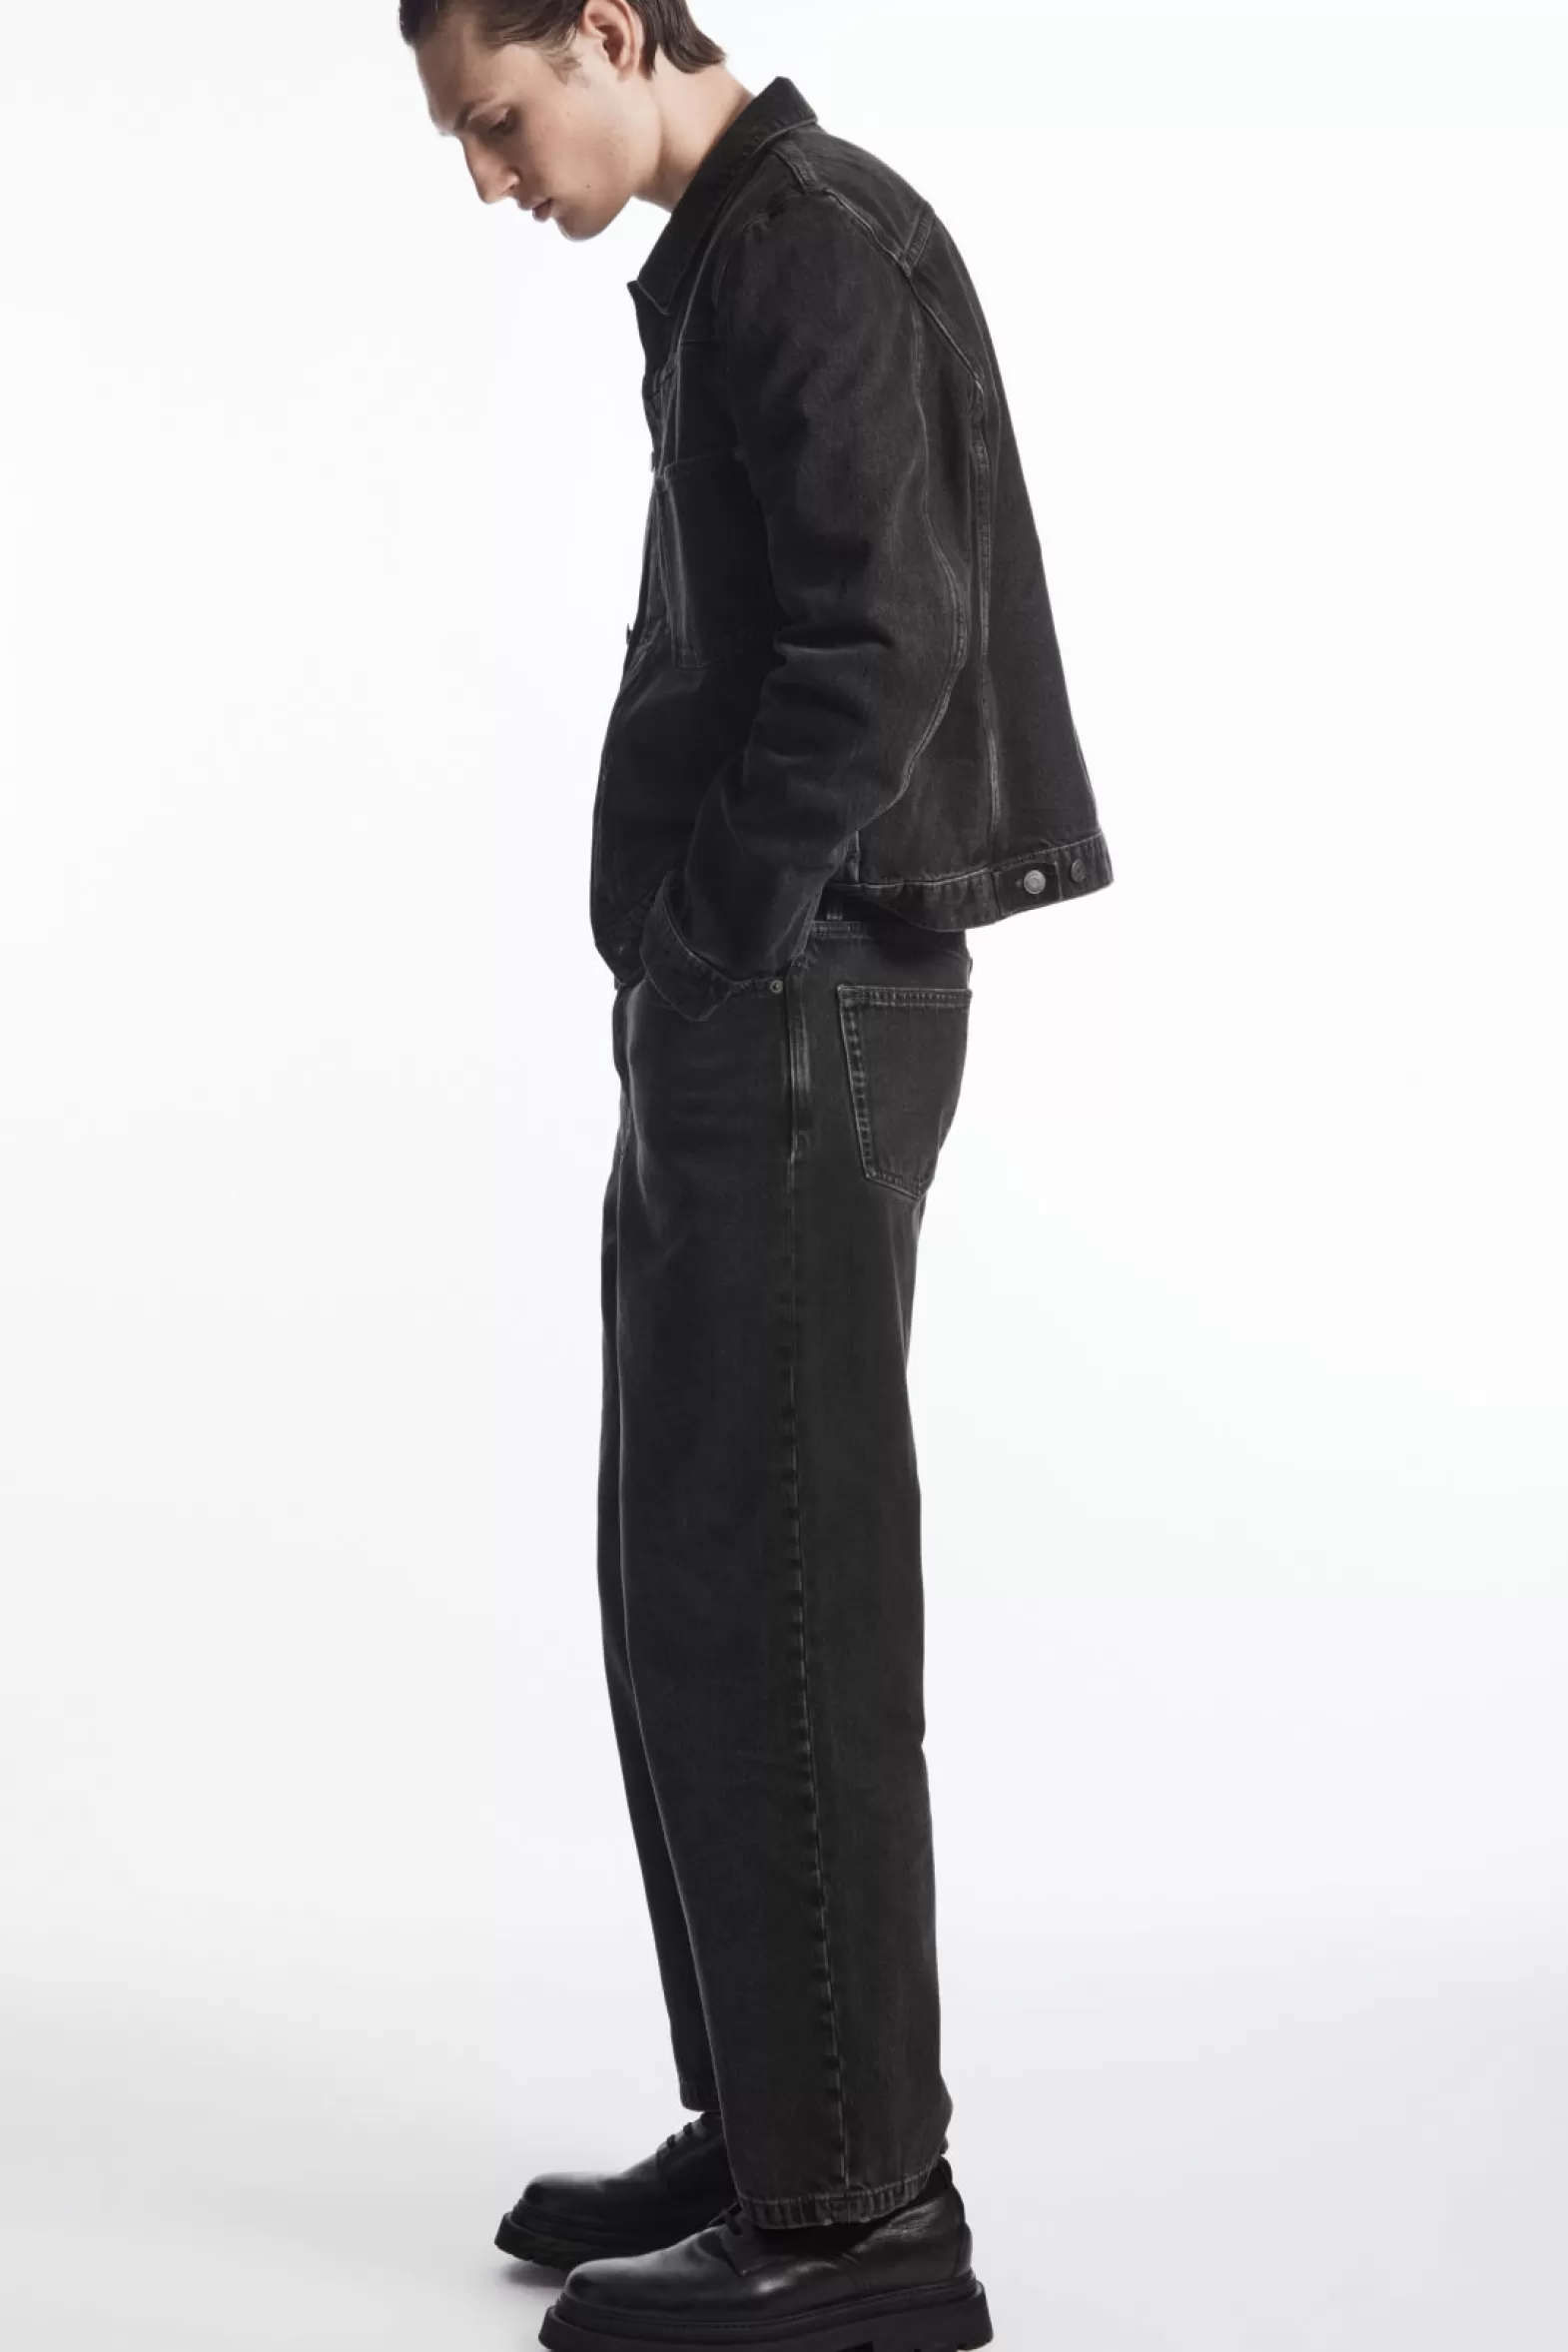 COS DOME JEANS - STRAIGHT/ANKLE LENGTH